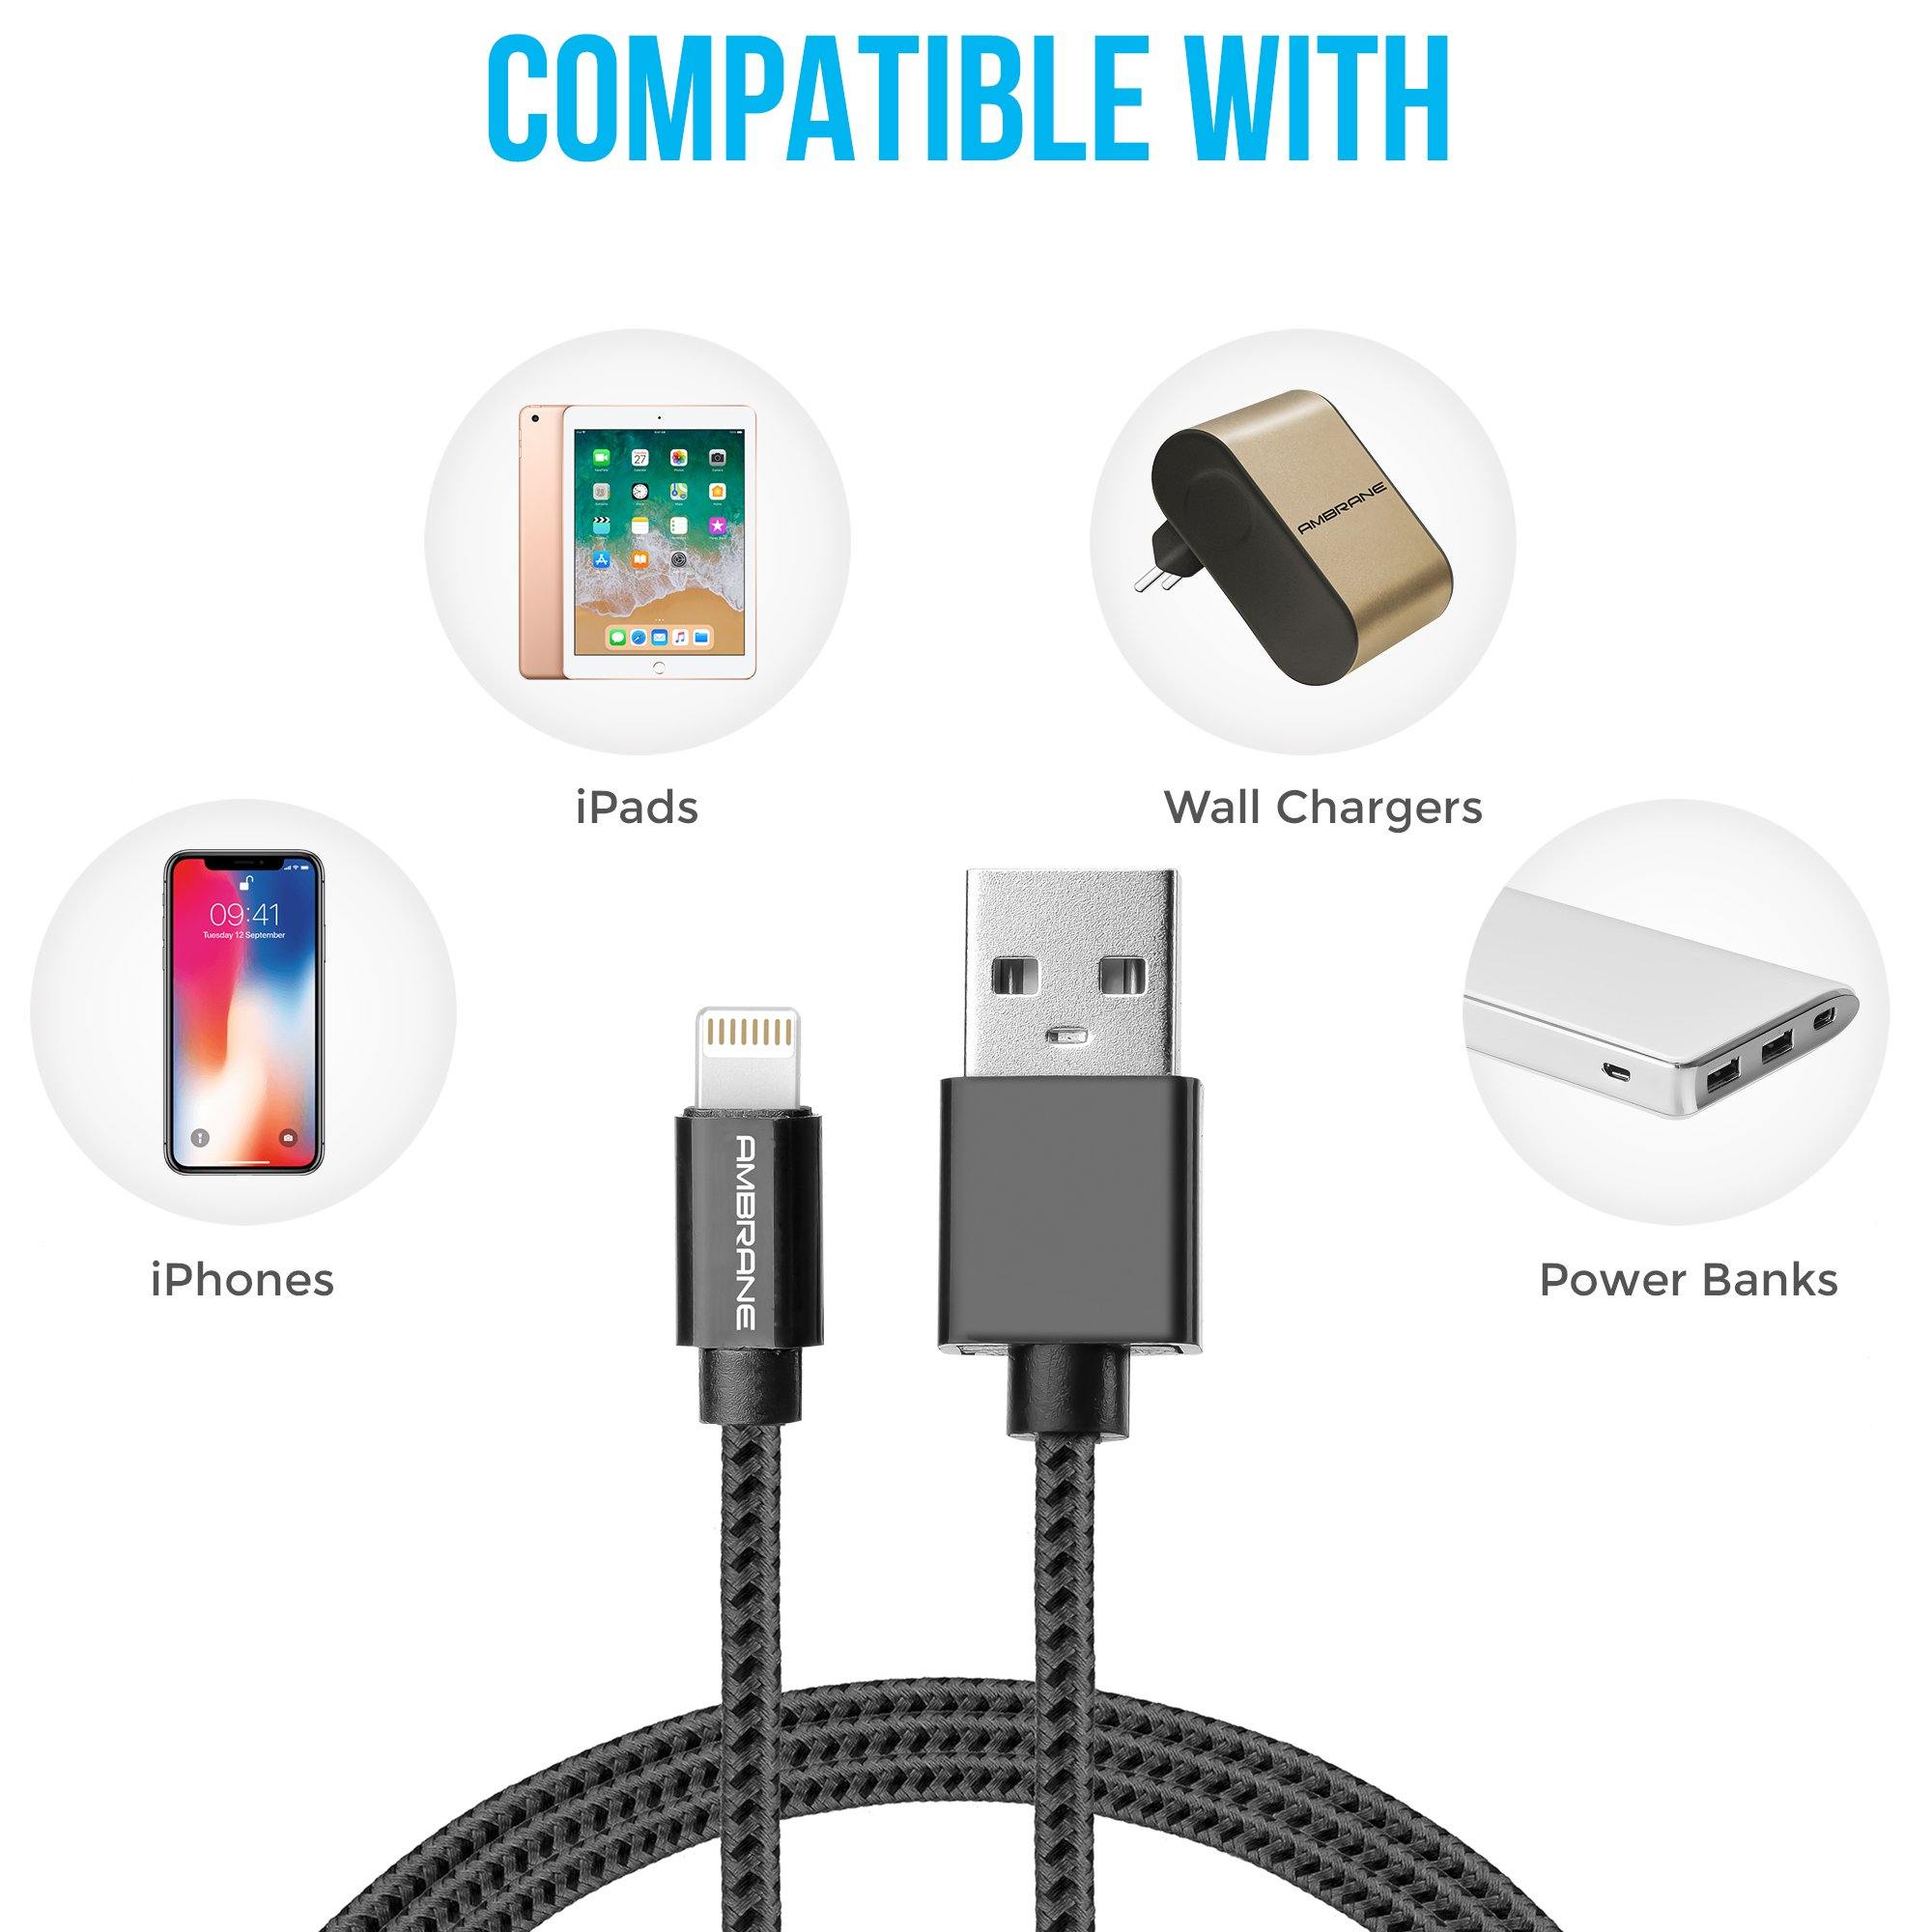 ABCL-15 Plus 3A Lightning Braided Cable (Grey/Black) - AmbraneIndia